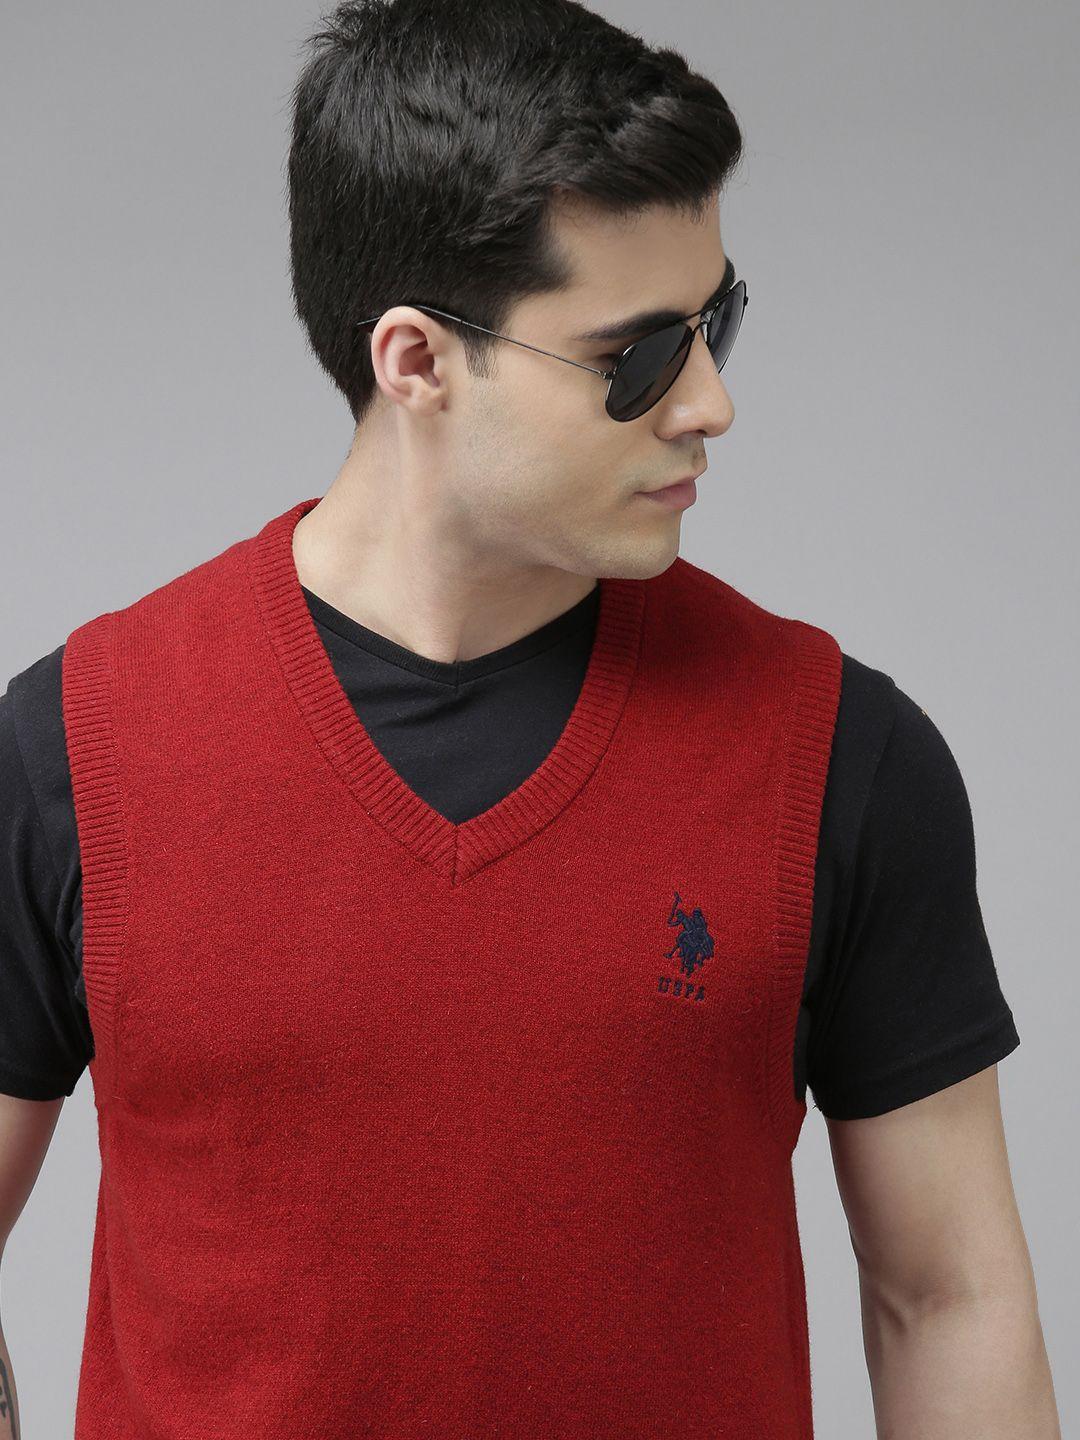 u.s. polo assn. men red sweater vest with embroidered detail